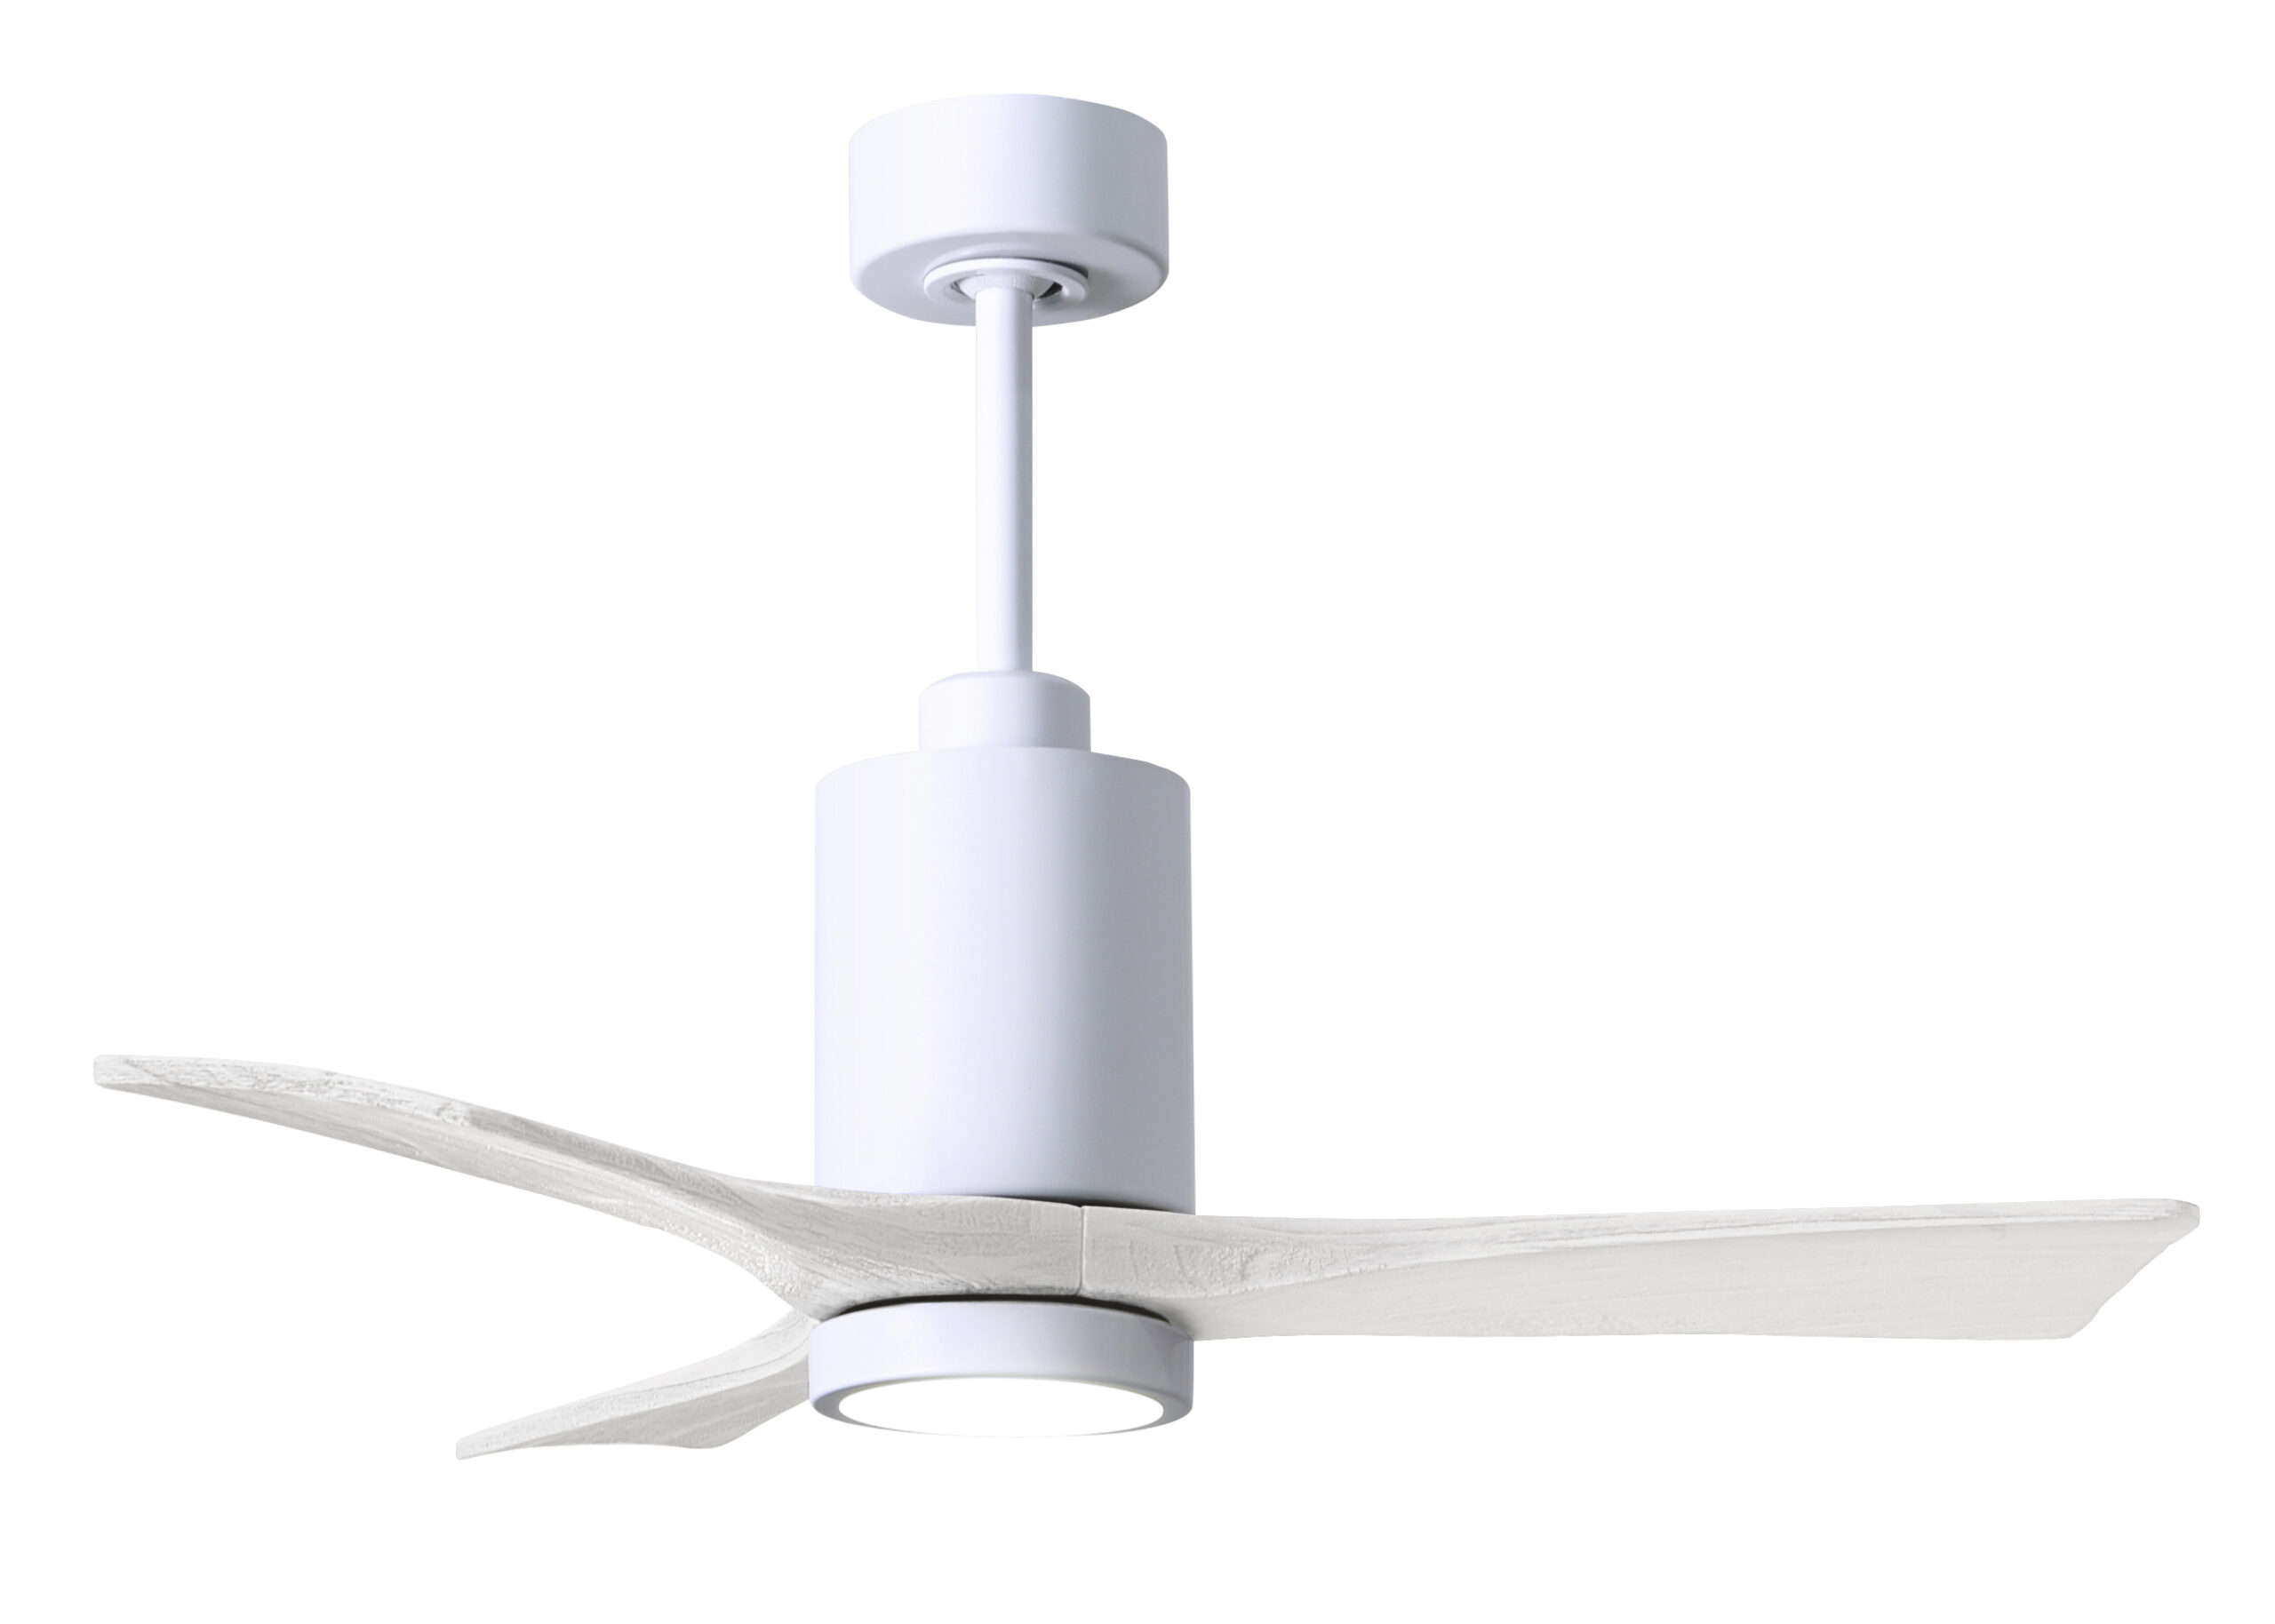 Patrícia-3 ceiling fan in Gloss White with 42” Matte White blades made by Matthews Fan Company.